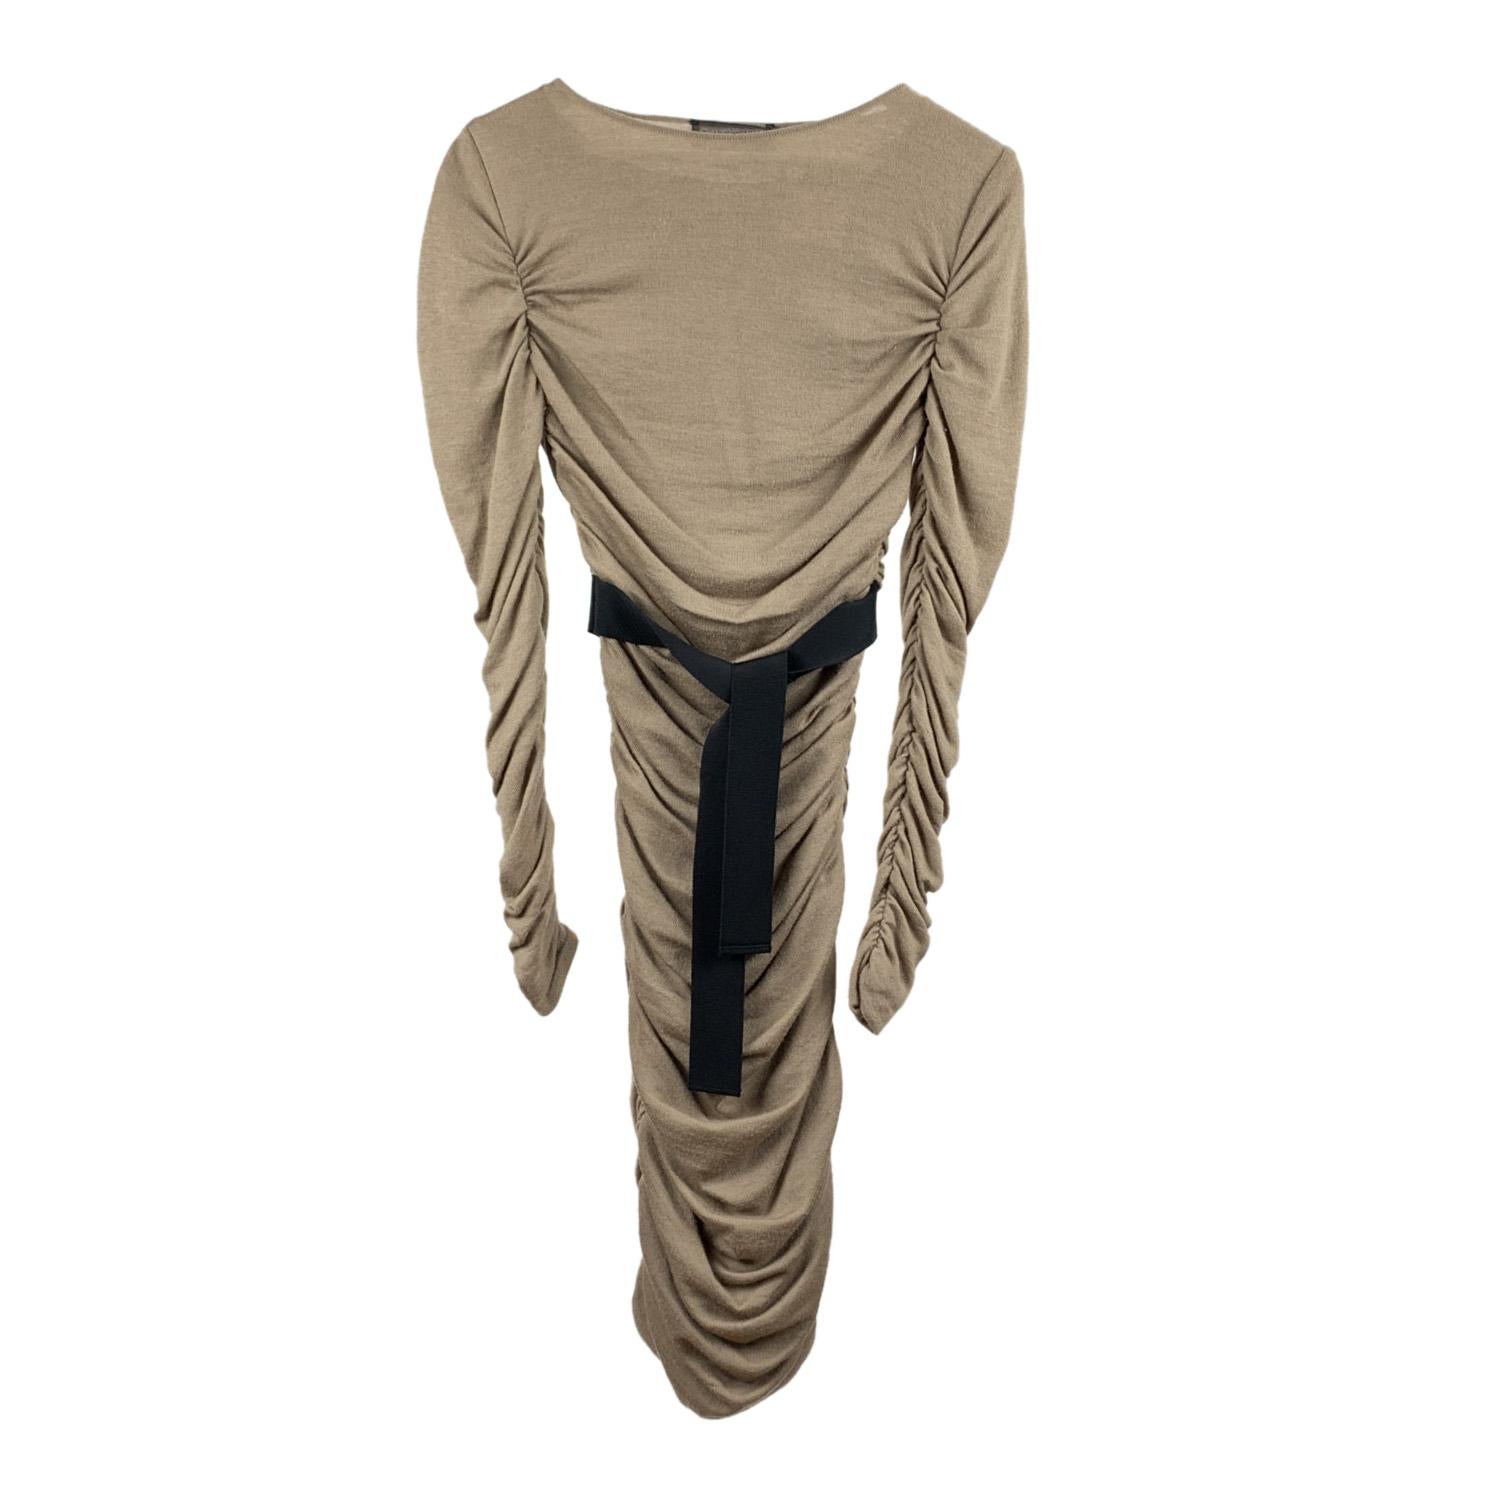 Giambattista Valli knit dress with draping in beige color. Contrast gros-grain belt. Boat neckline. Long sleeve styling. Lined with a stretch fabric. Side zip closure. Composition: 70% Wool, 10% Silk, 10% Cashmere. Size: 40 IT, XS

Details

STYLE: